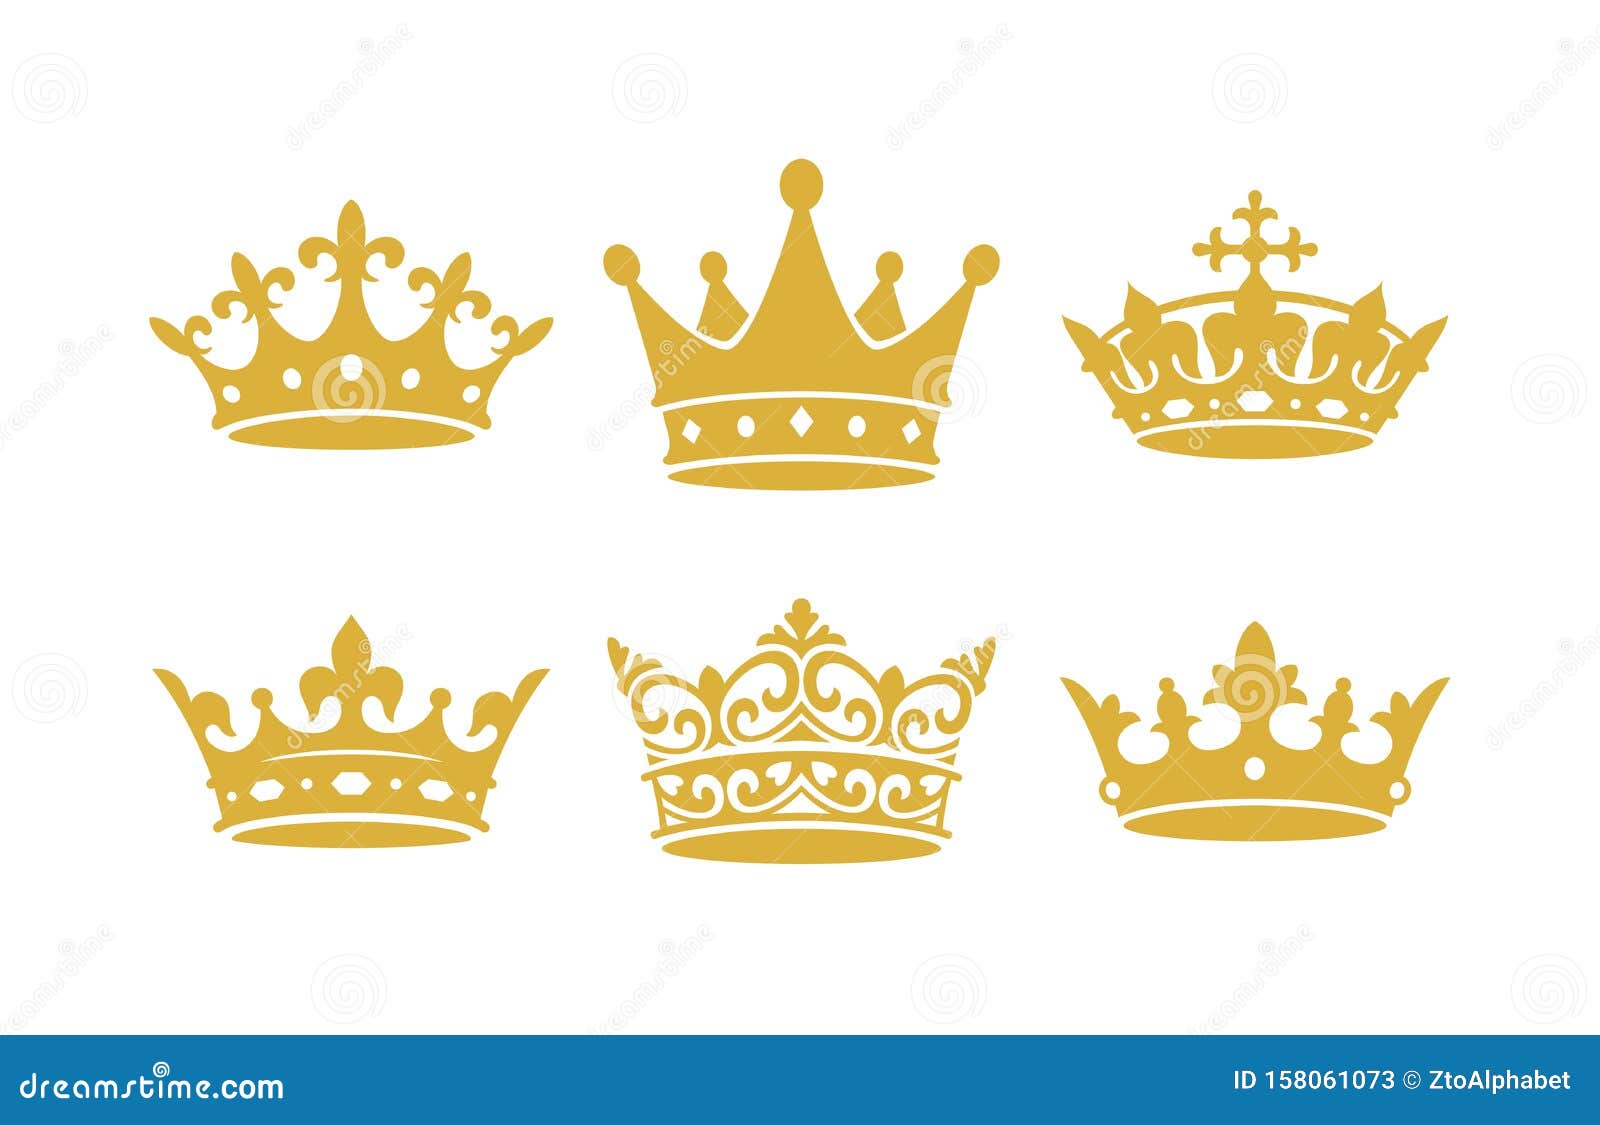 Download Crown Clipart Collection Set Stock Vector - Illustration ...